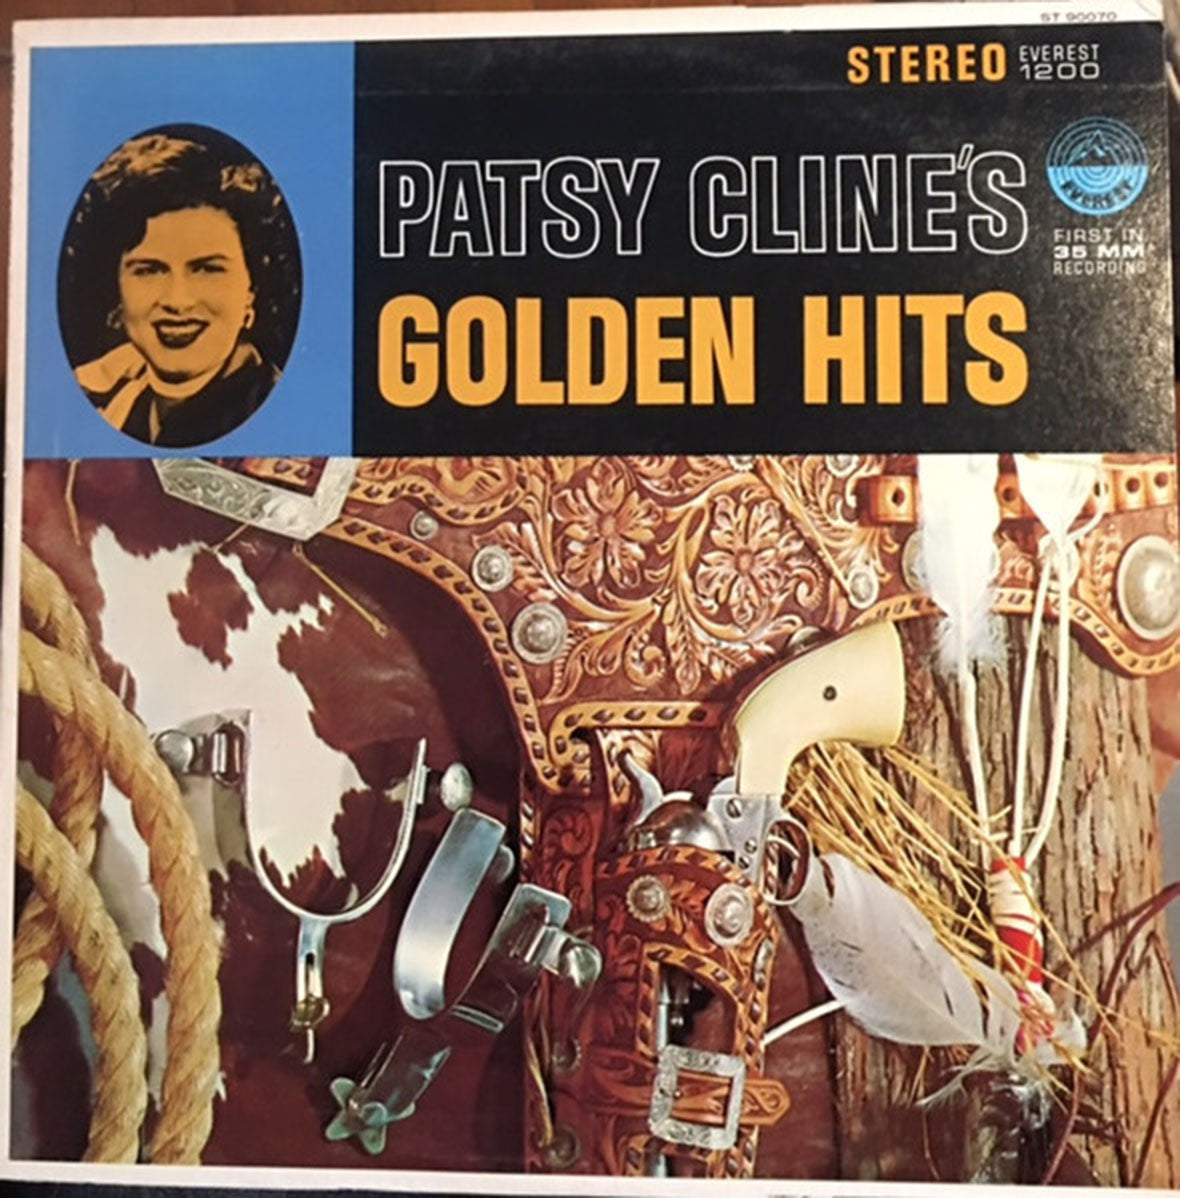 Patsy Cline – Golden Hits - US Pressing